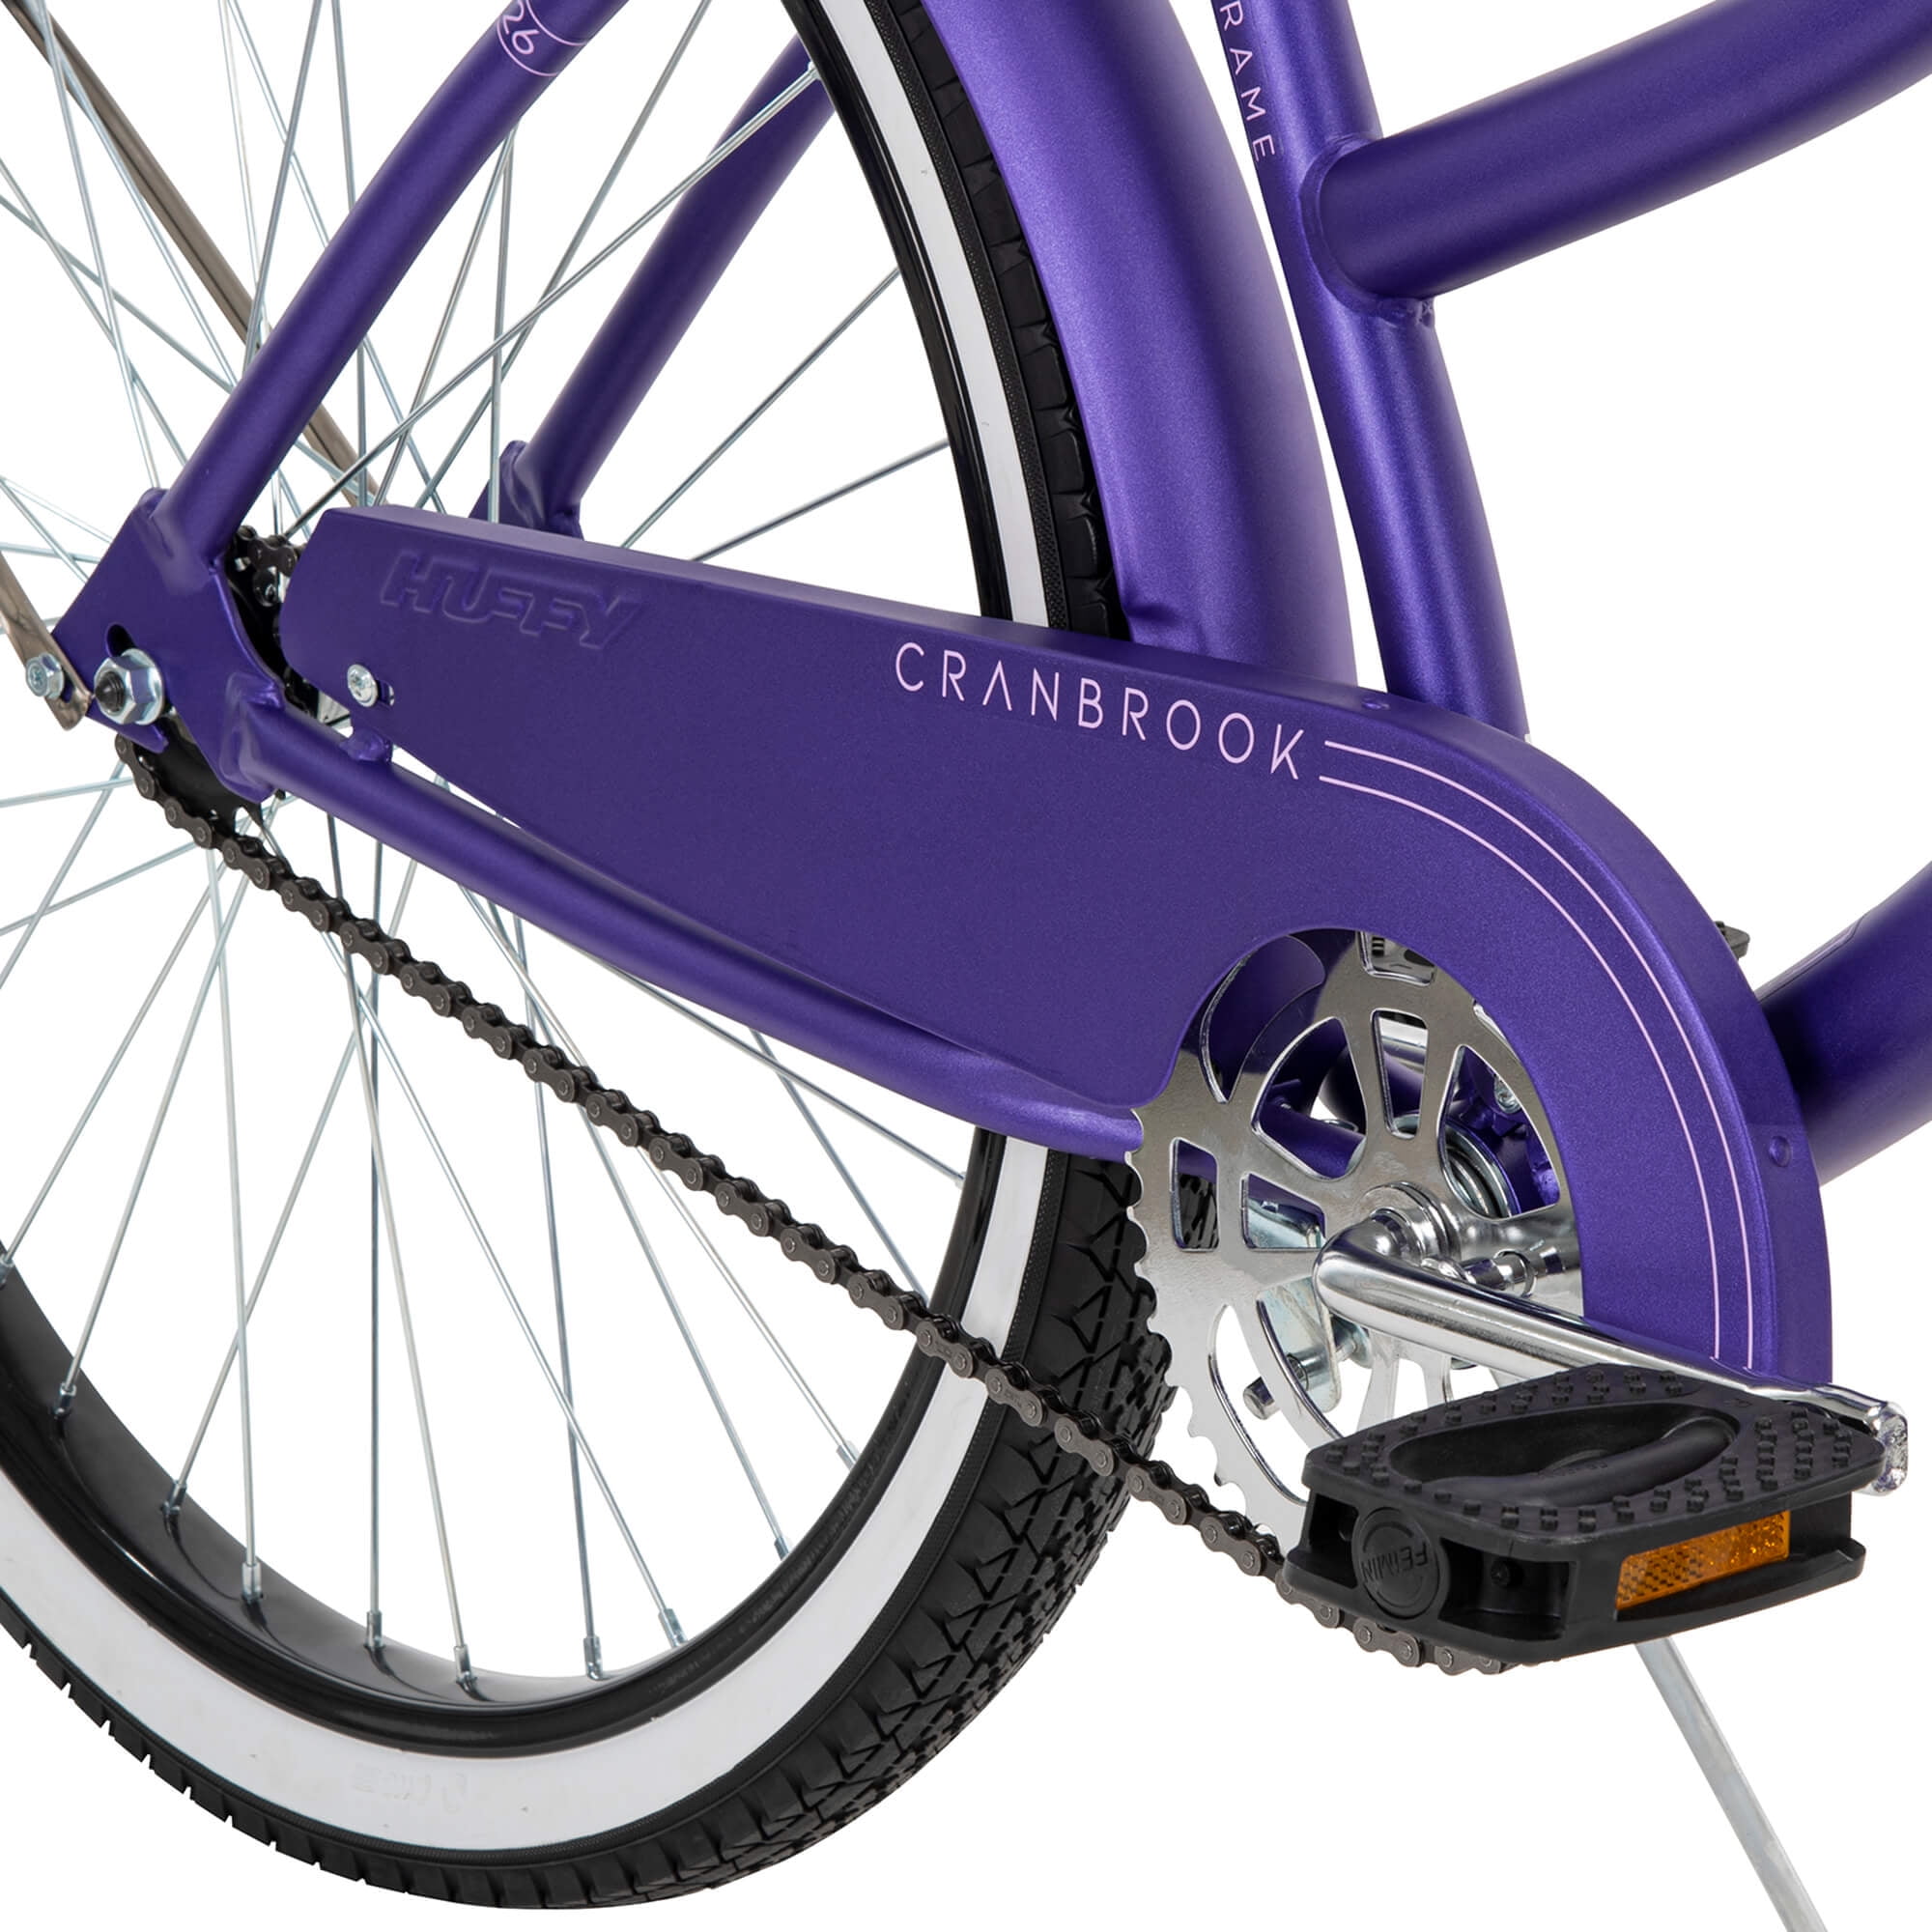 Best Huffy Cranbrook Bike Accessories to Buy in 2022